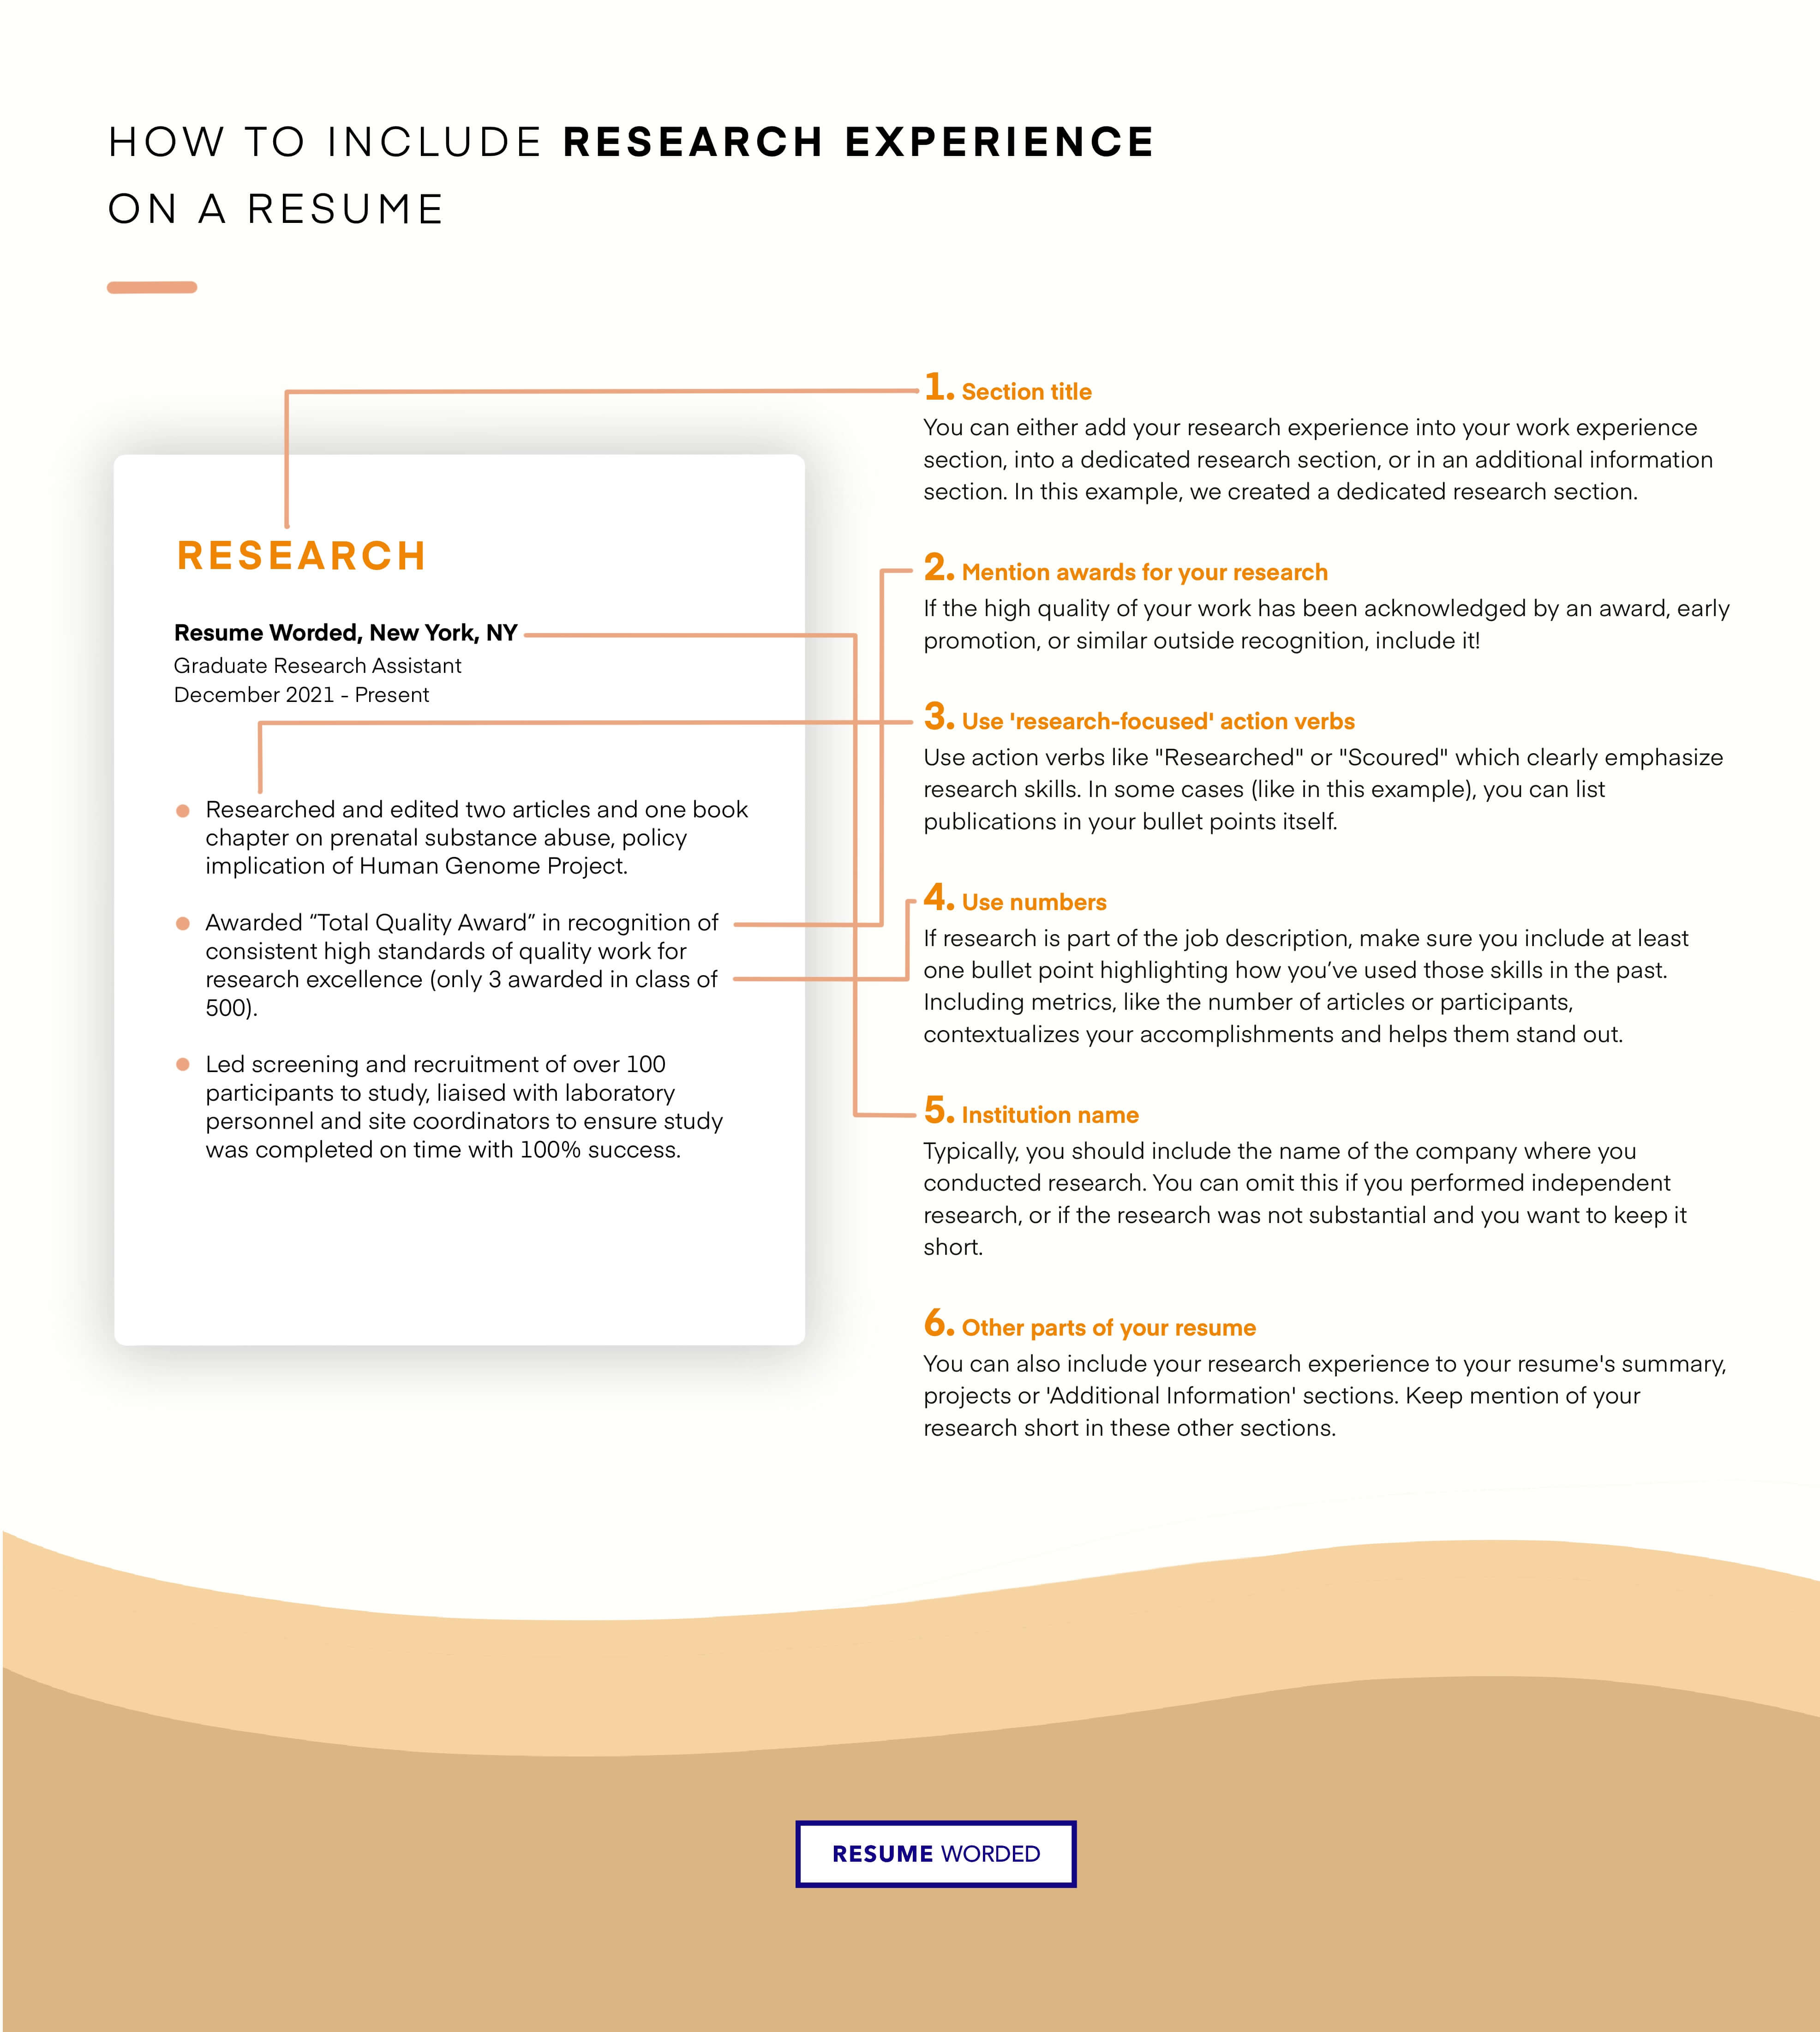 Include the UX research tools you are familiar with. - UX Researcher Resume